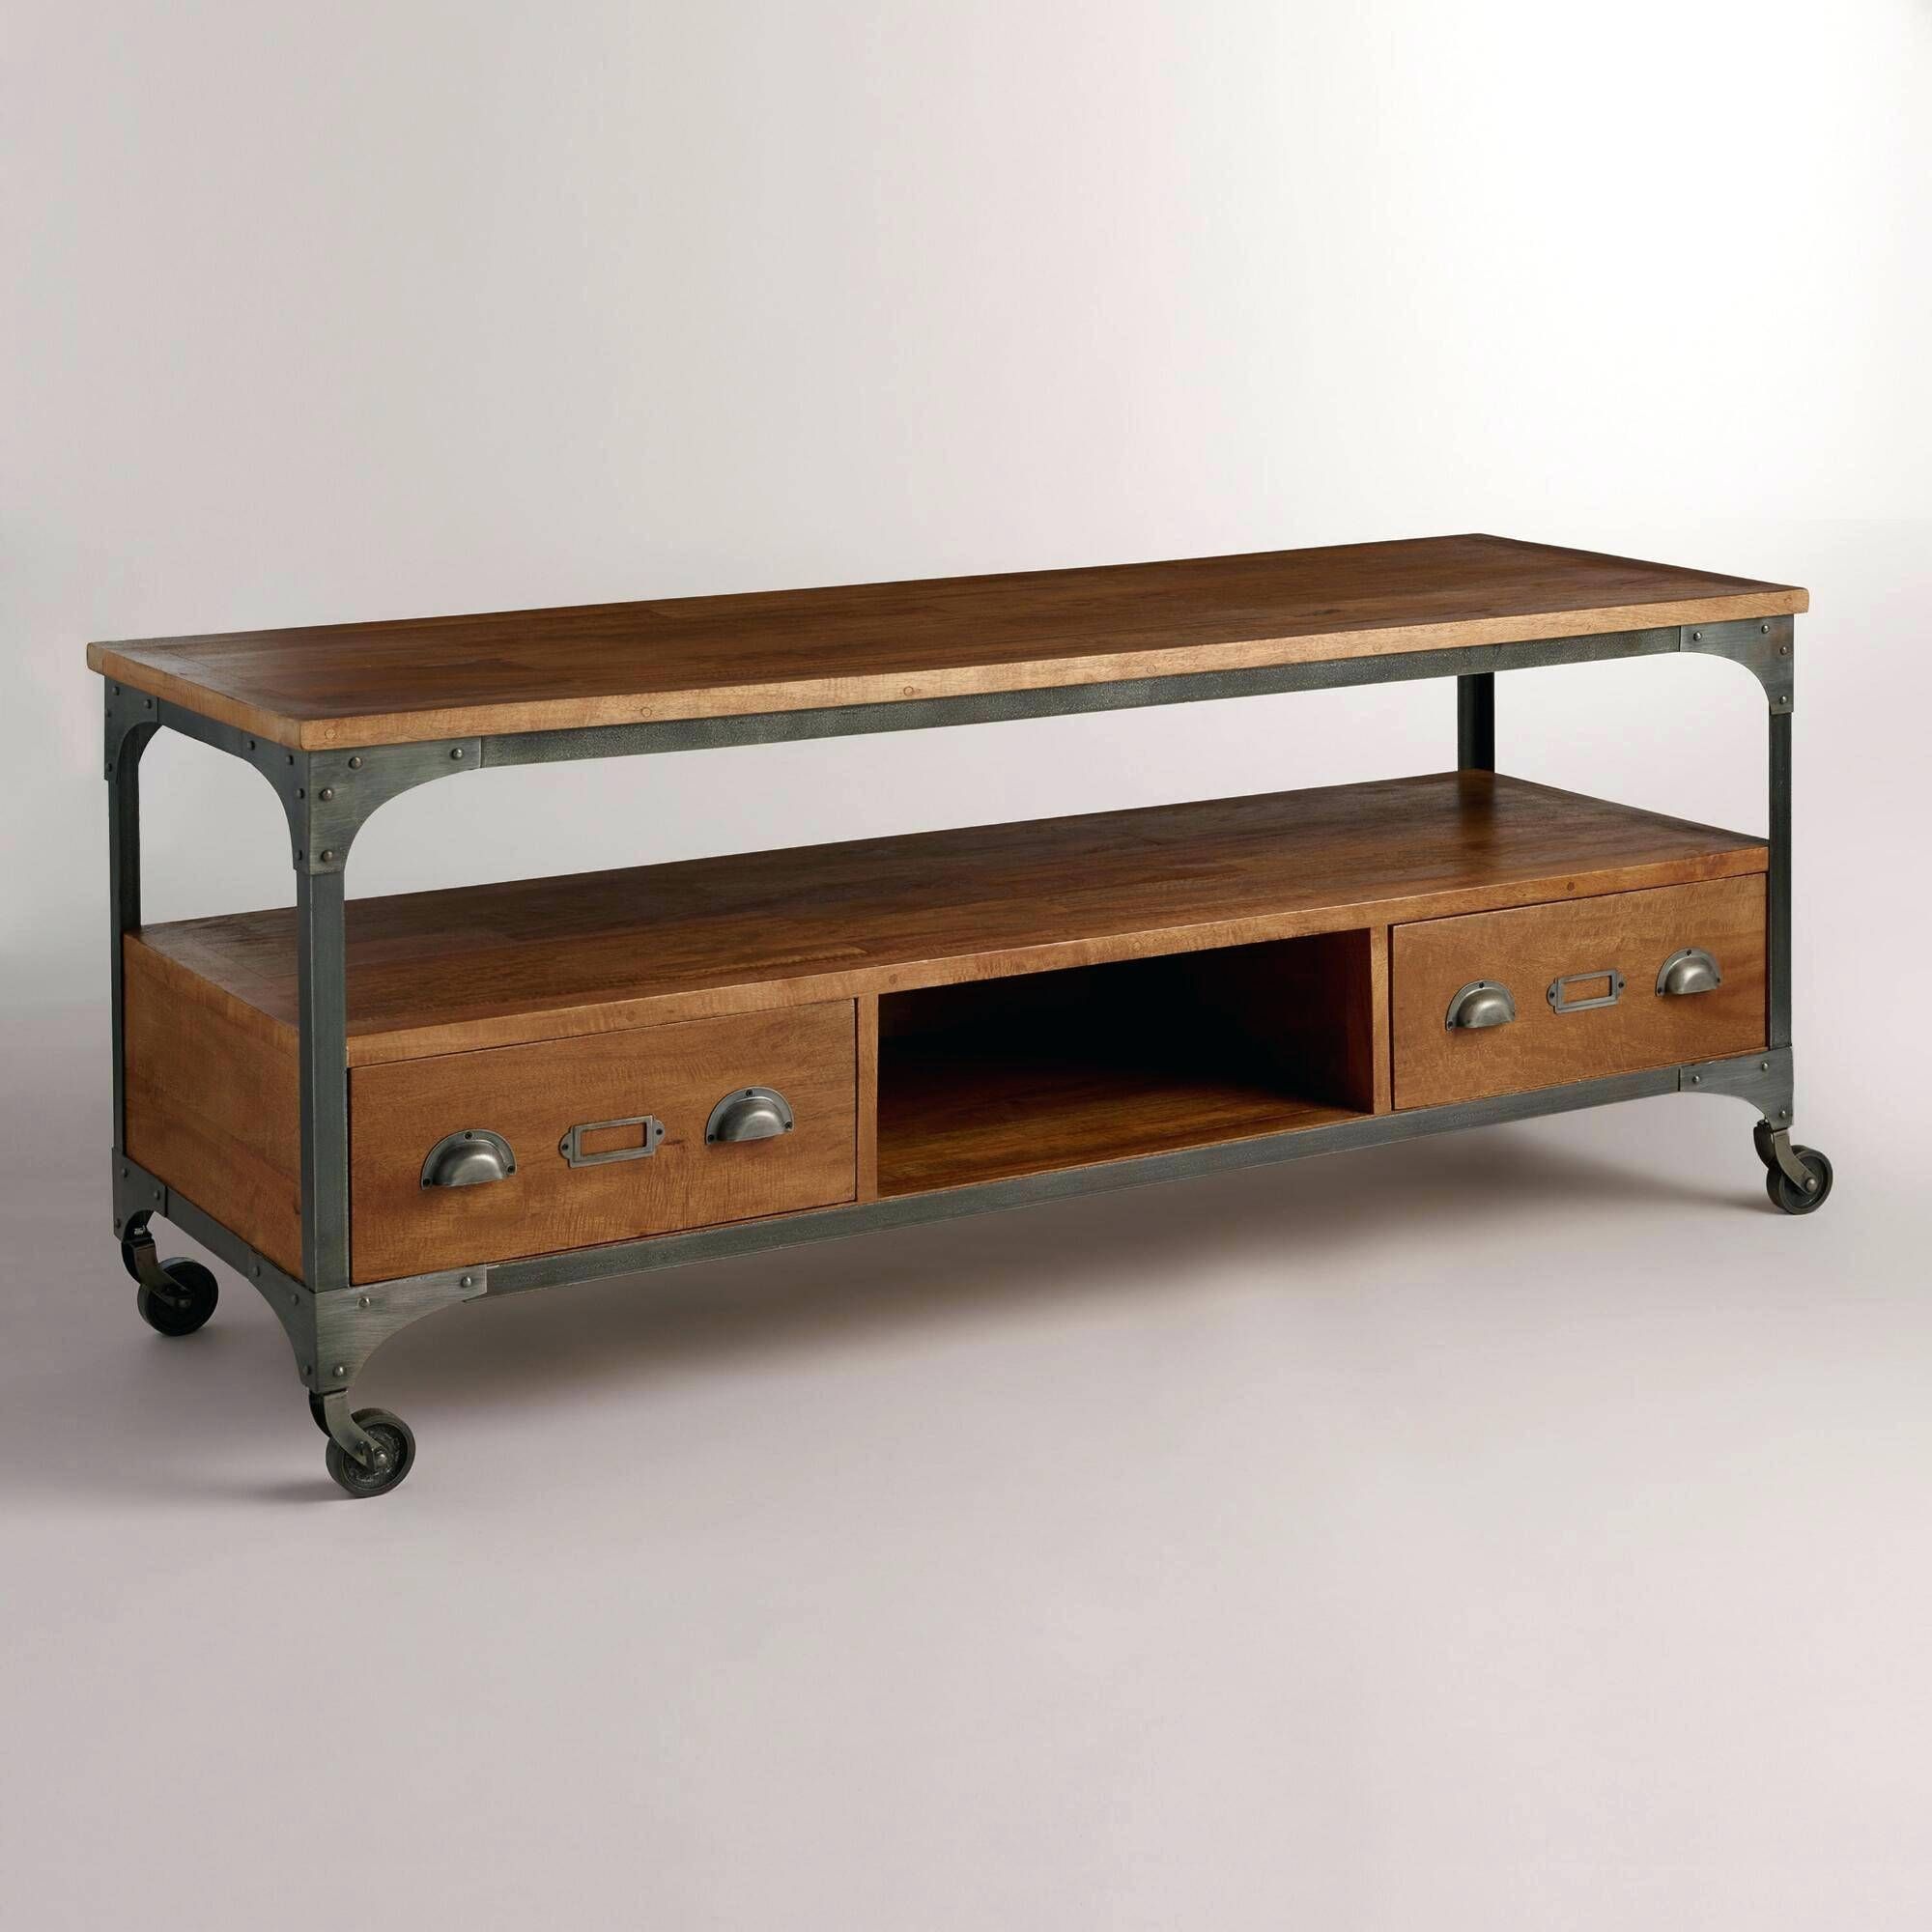 Tv Stand : 97 Tv Stand Design Wood And Metal Aiden Media Stand Throughout Wood And Metal Tv Stands (View 6 of 15)